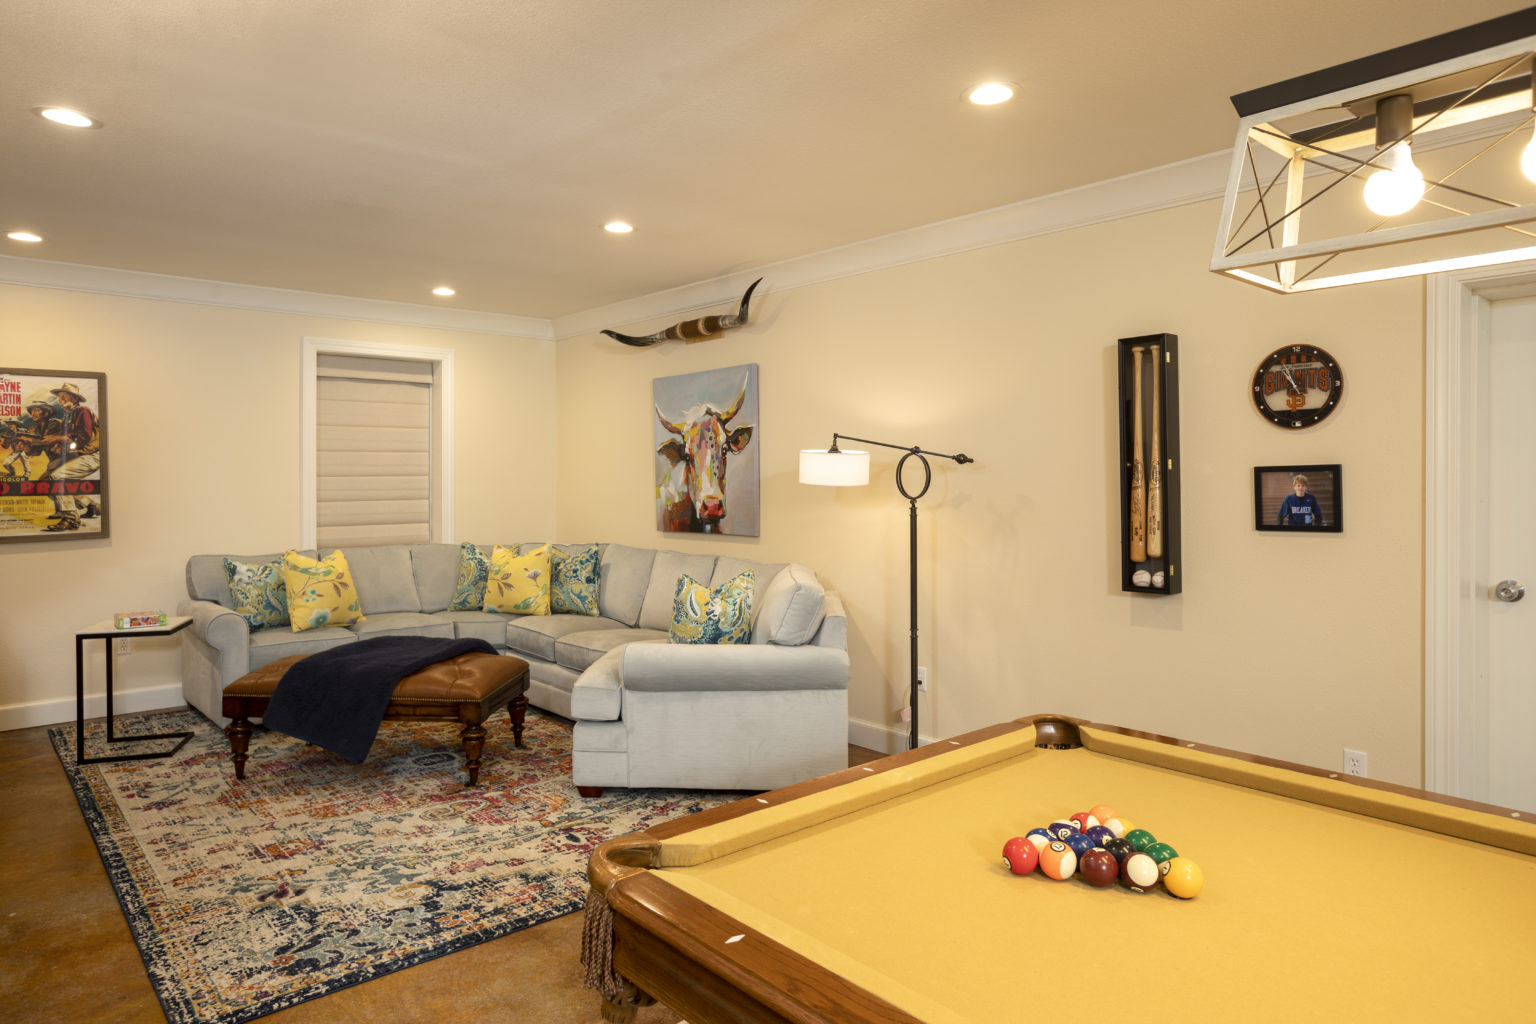 Billiards Table in a Spacious Game Room